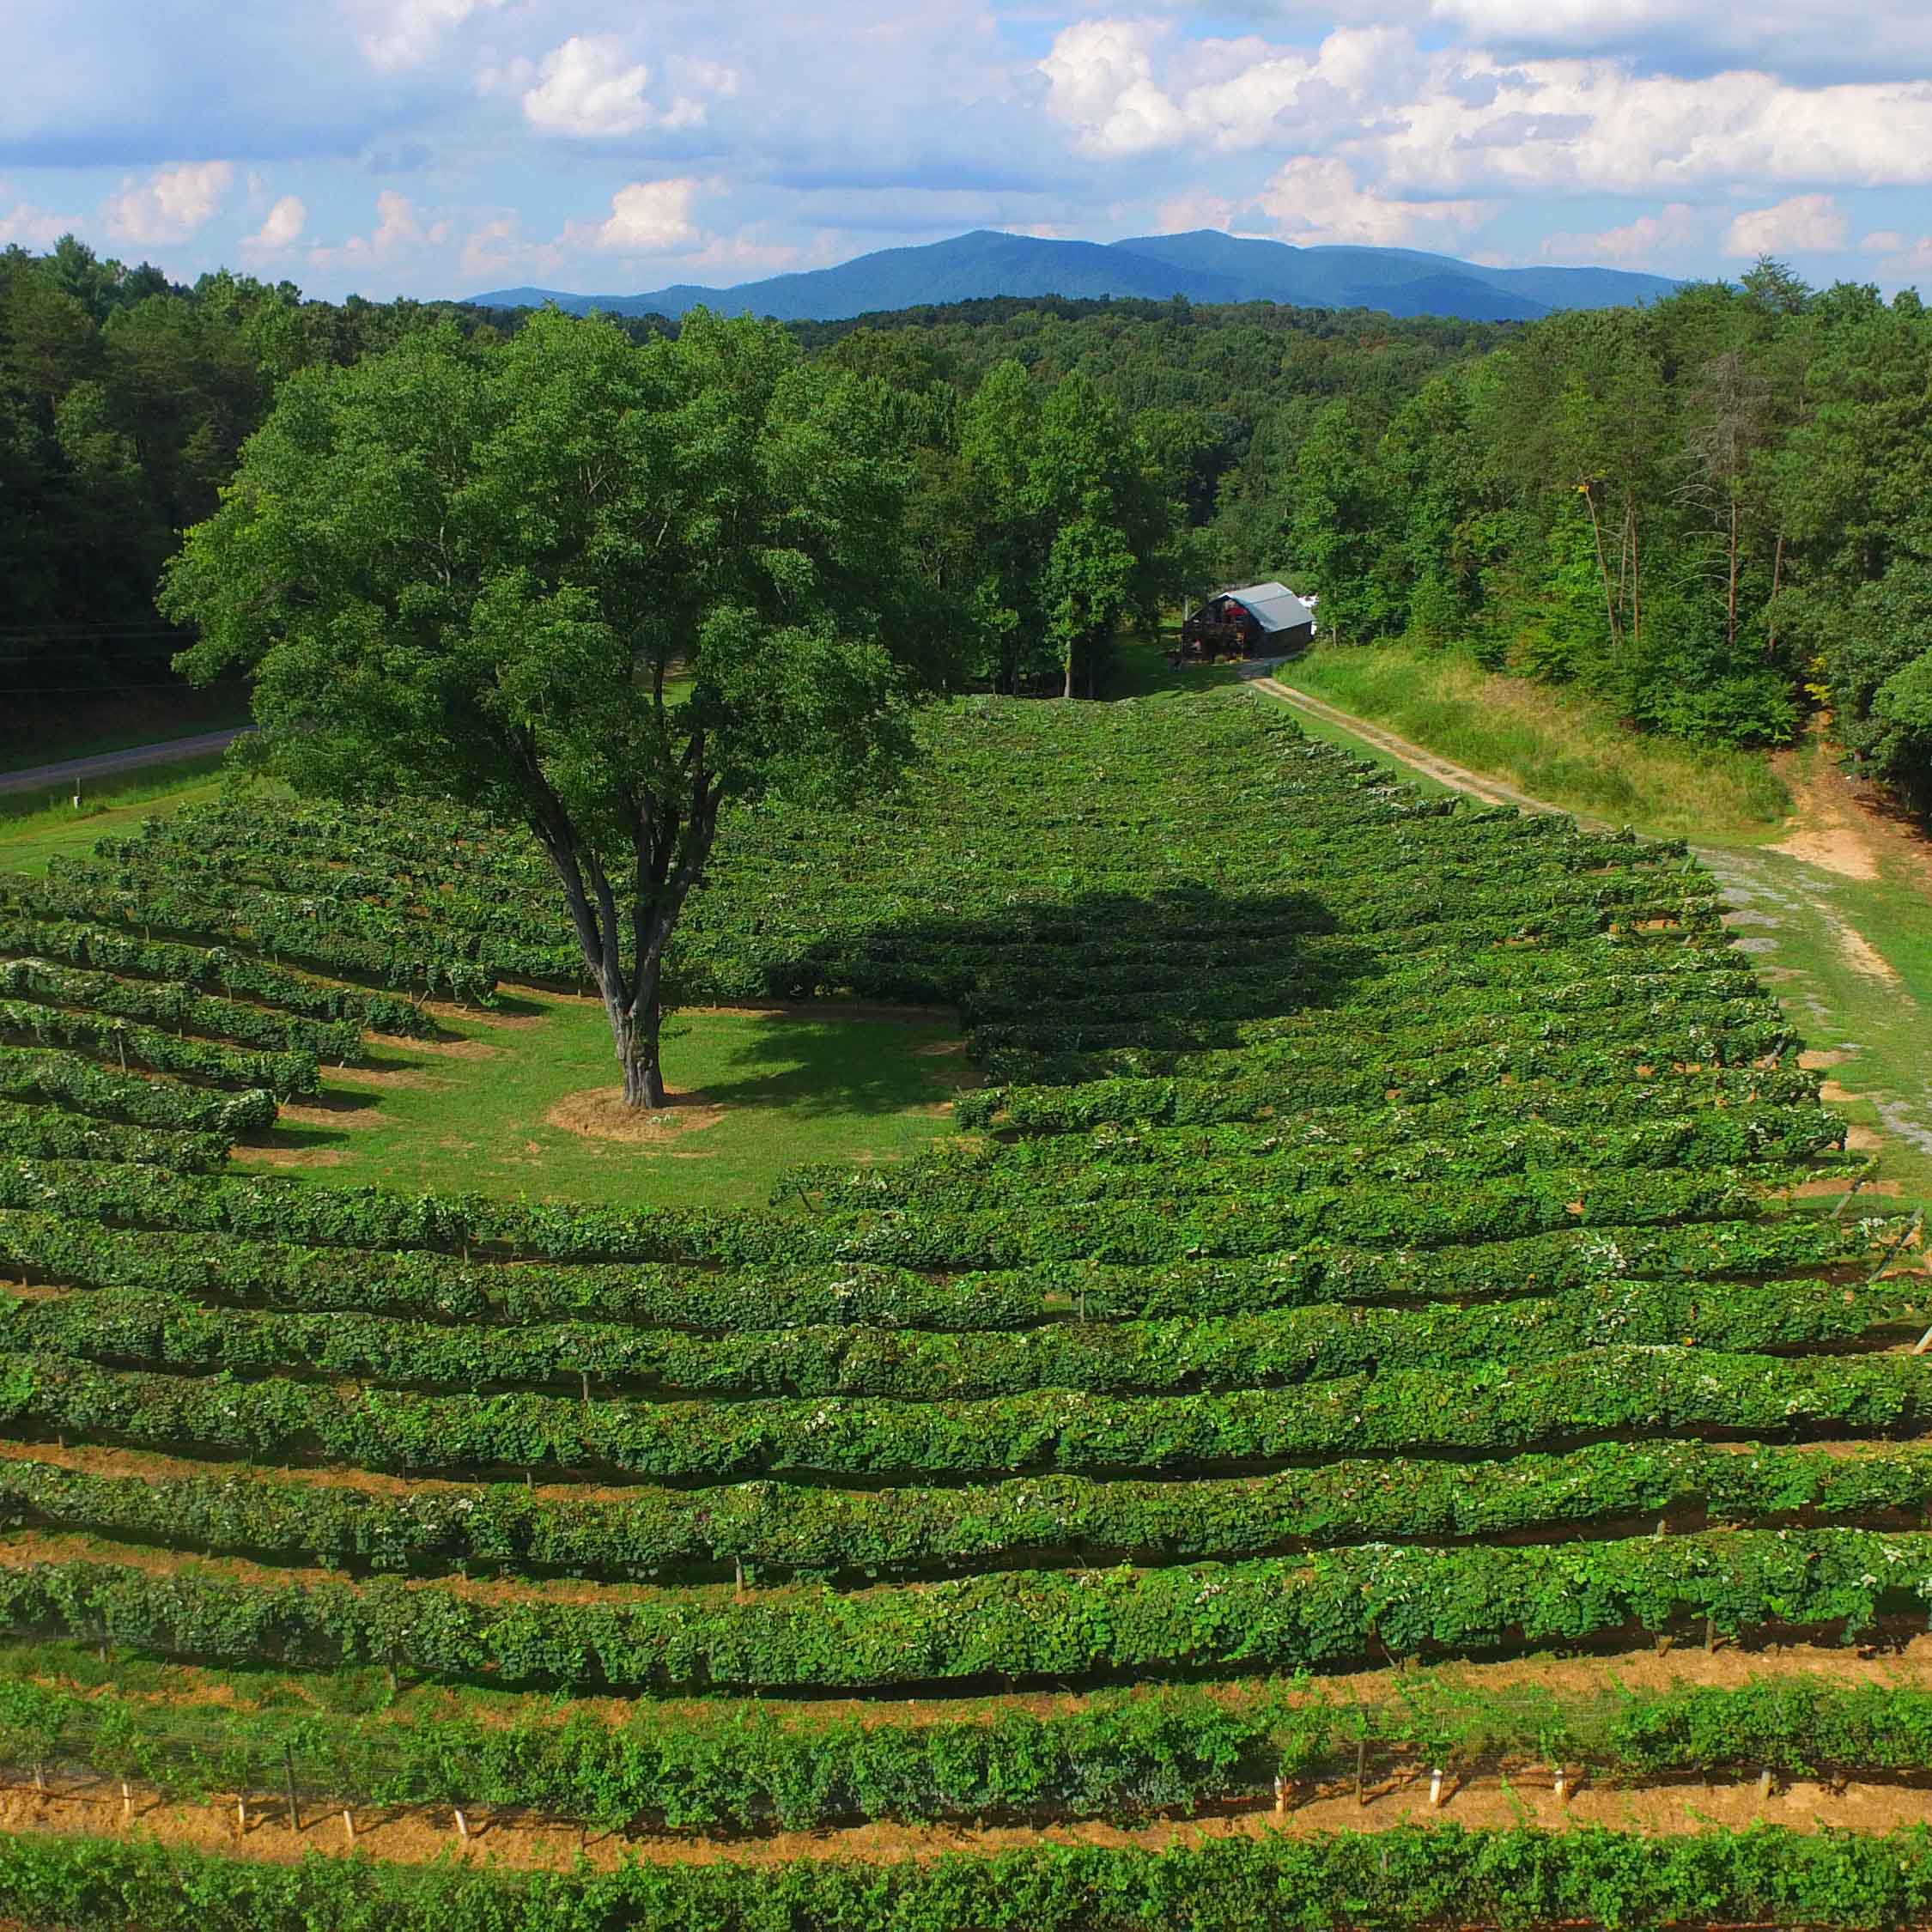 Cartecay Vineyards is one of many north Georgia wine grape vineyards that will be harvesting grapes this month.